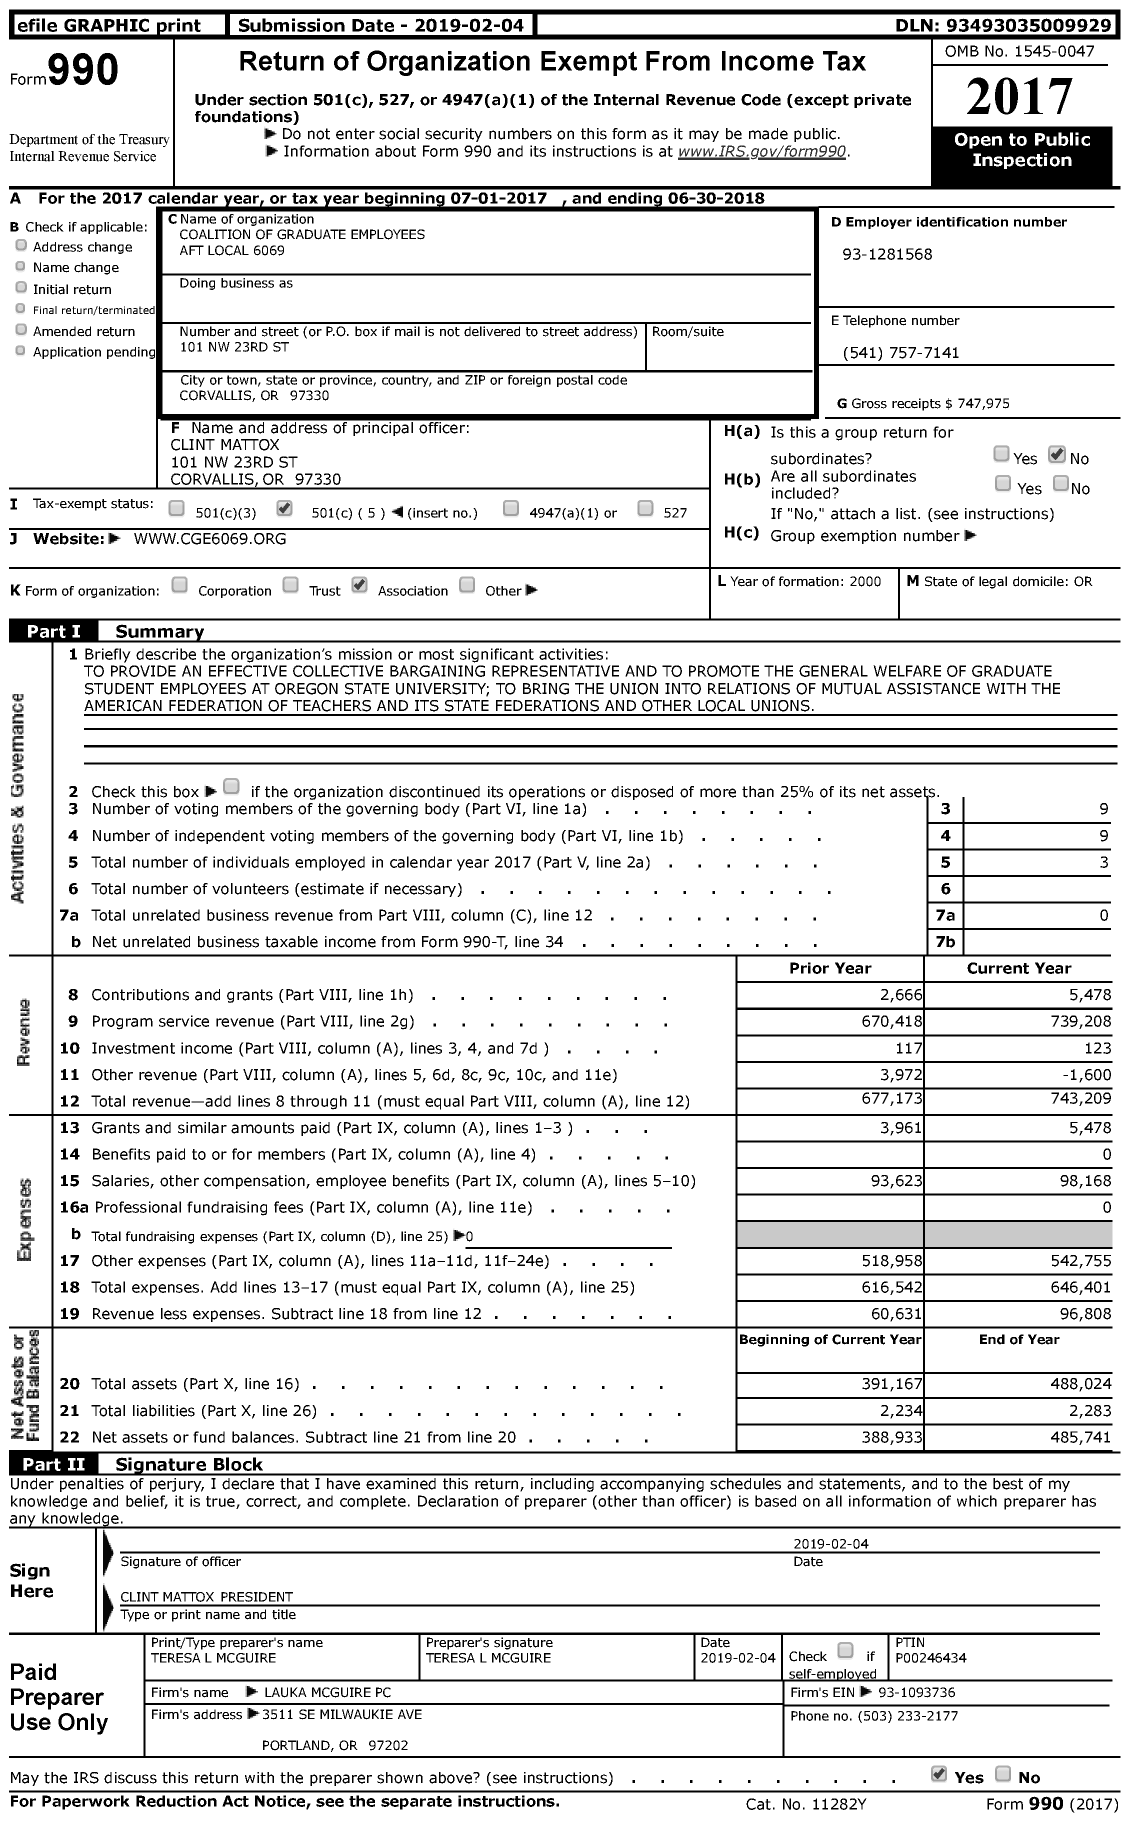 Image of first page of 2017 Form 990 for American Federation of Teachers - 6069 Coalition of Graduate Employee